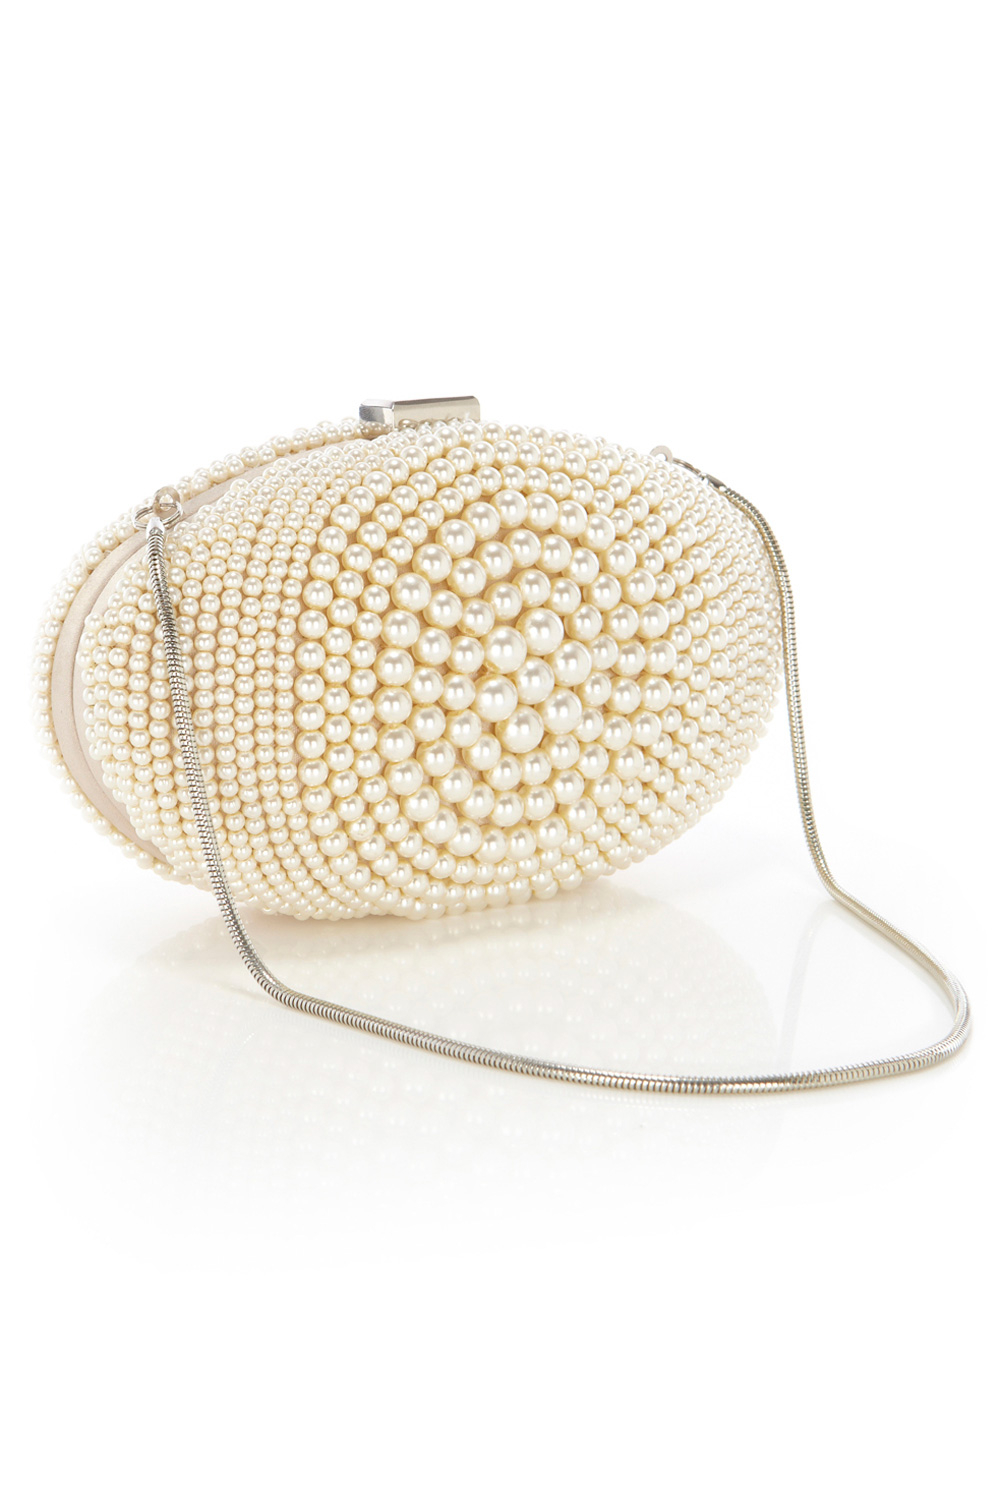 Lyst - Coast Paloma Pearl Clutch in Natural